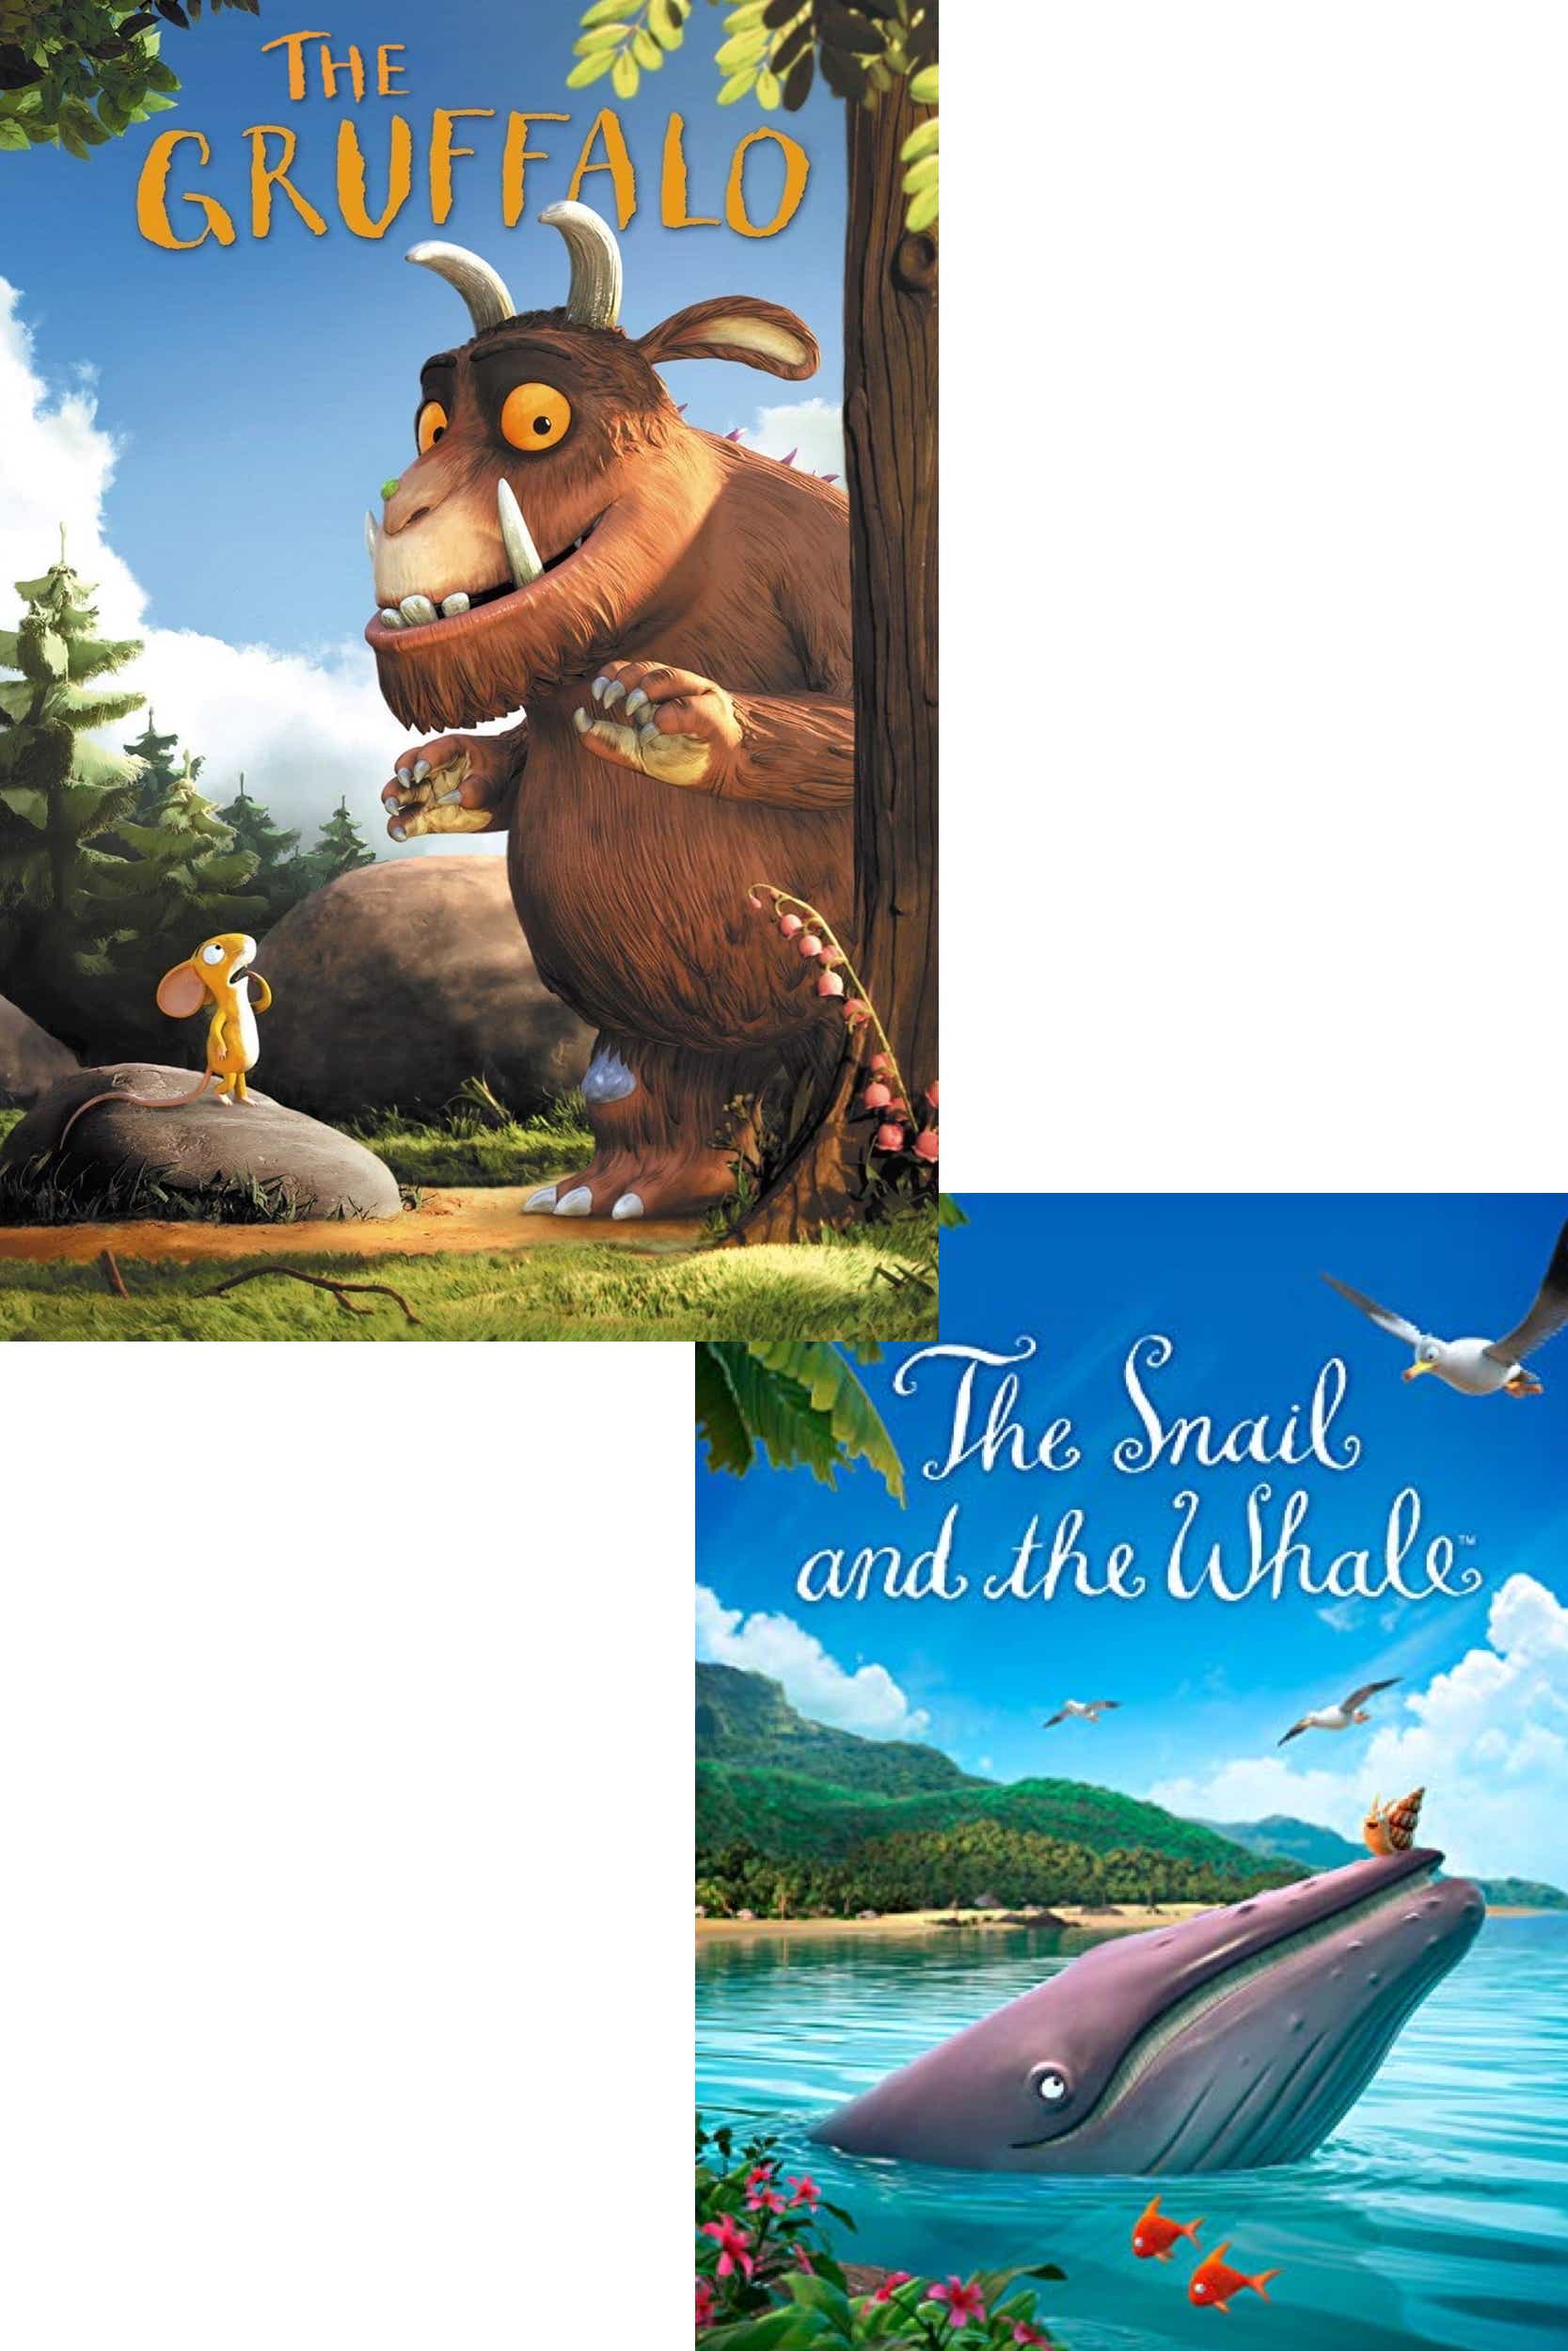 The Gruffalo w/ The Snail and the Whale